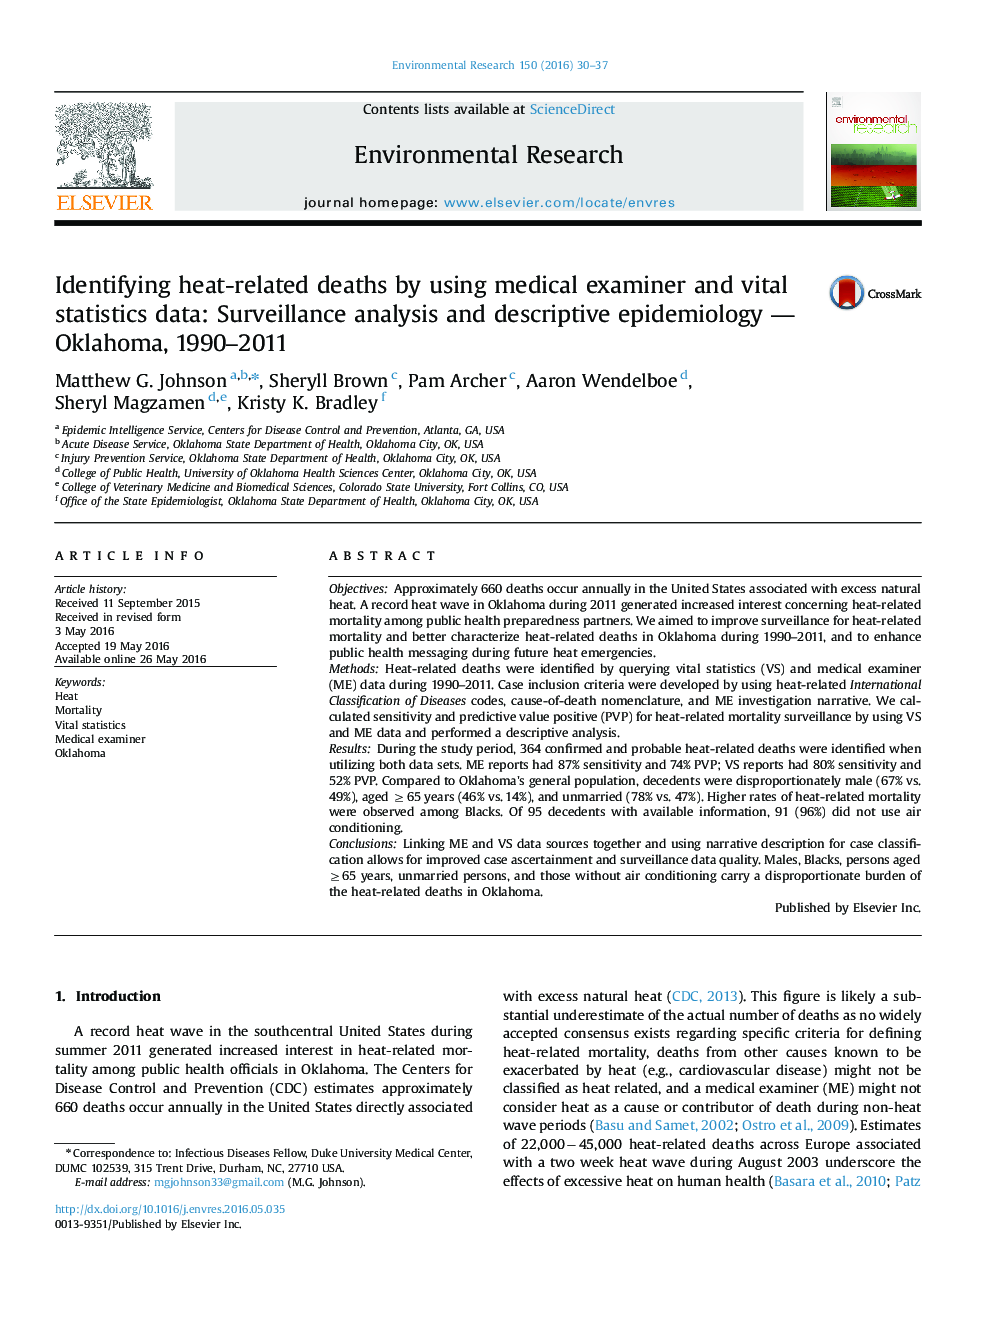 Identifying heat-related deaths by using medical examiner and vital statistics data: Surveillance analysis and descriptive epidemiology - Oklahoma, 1990-2011